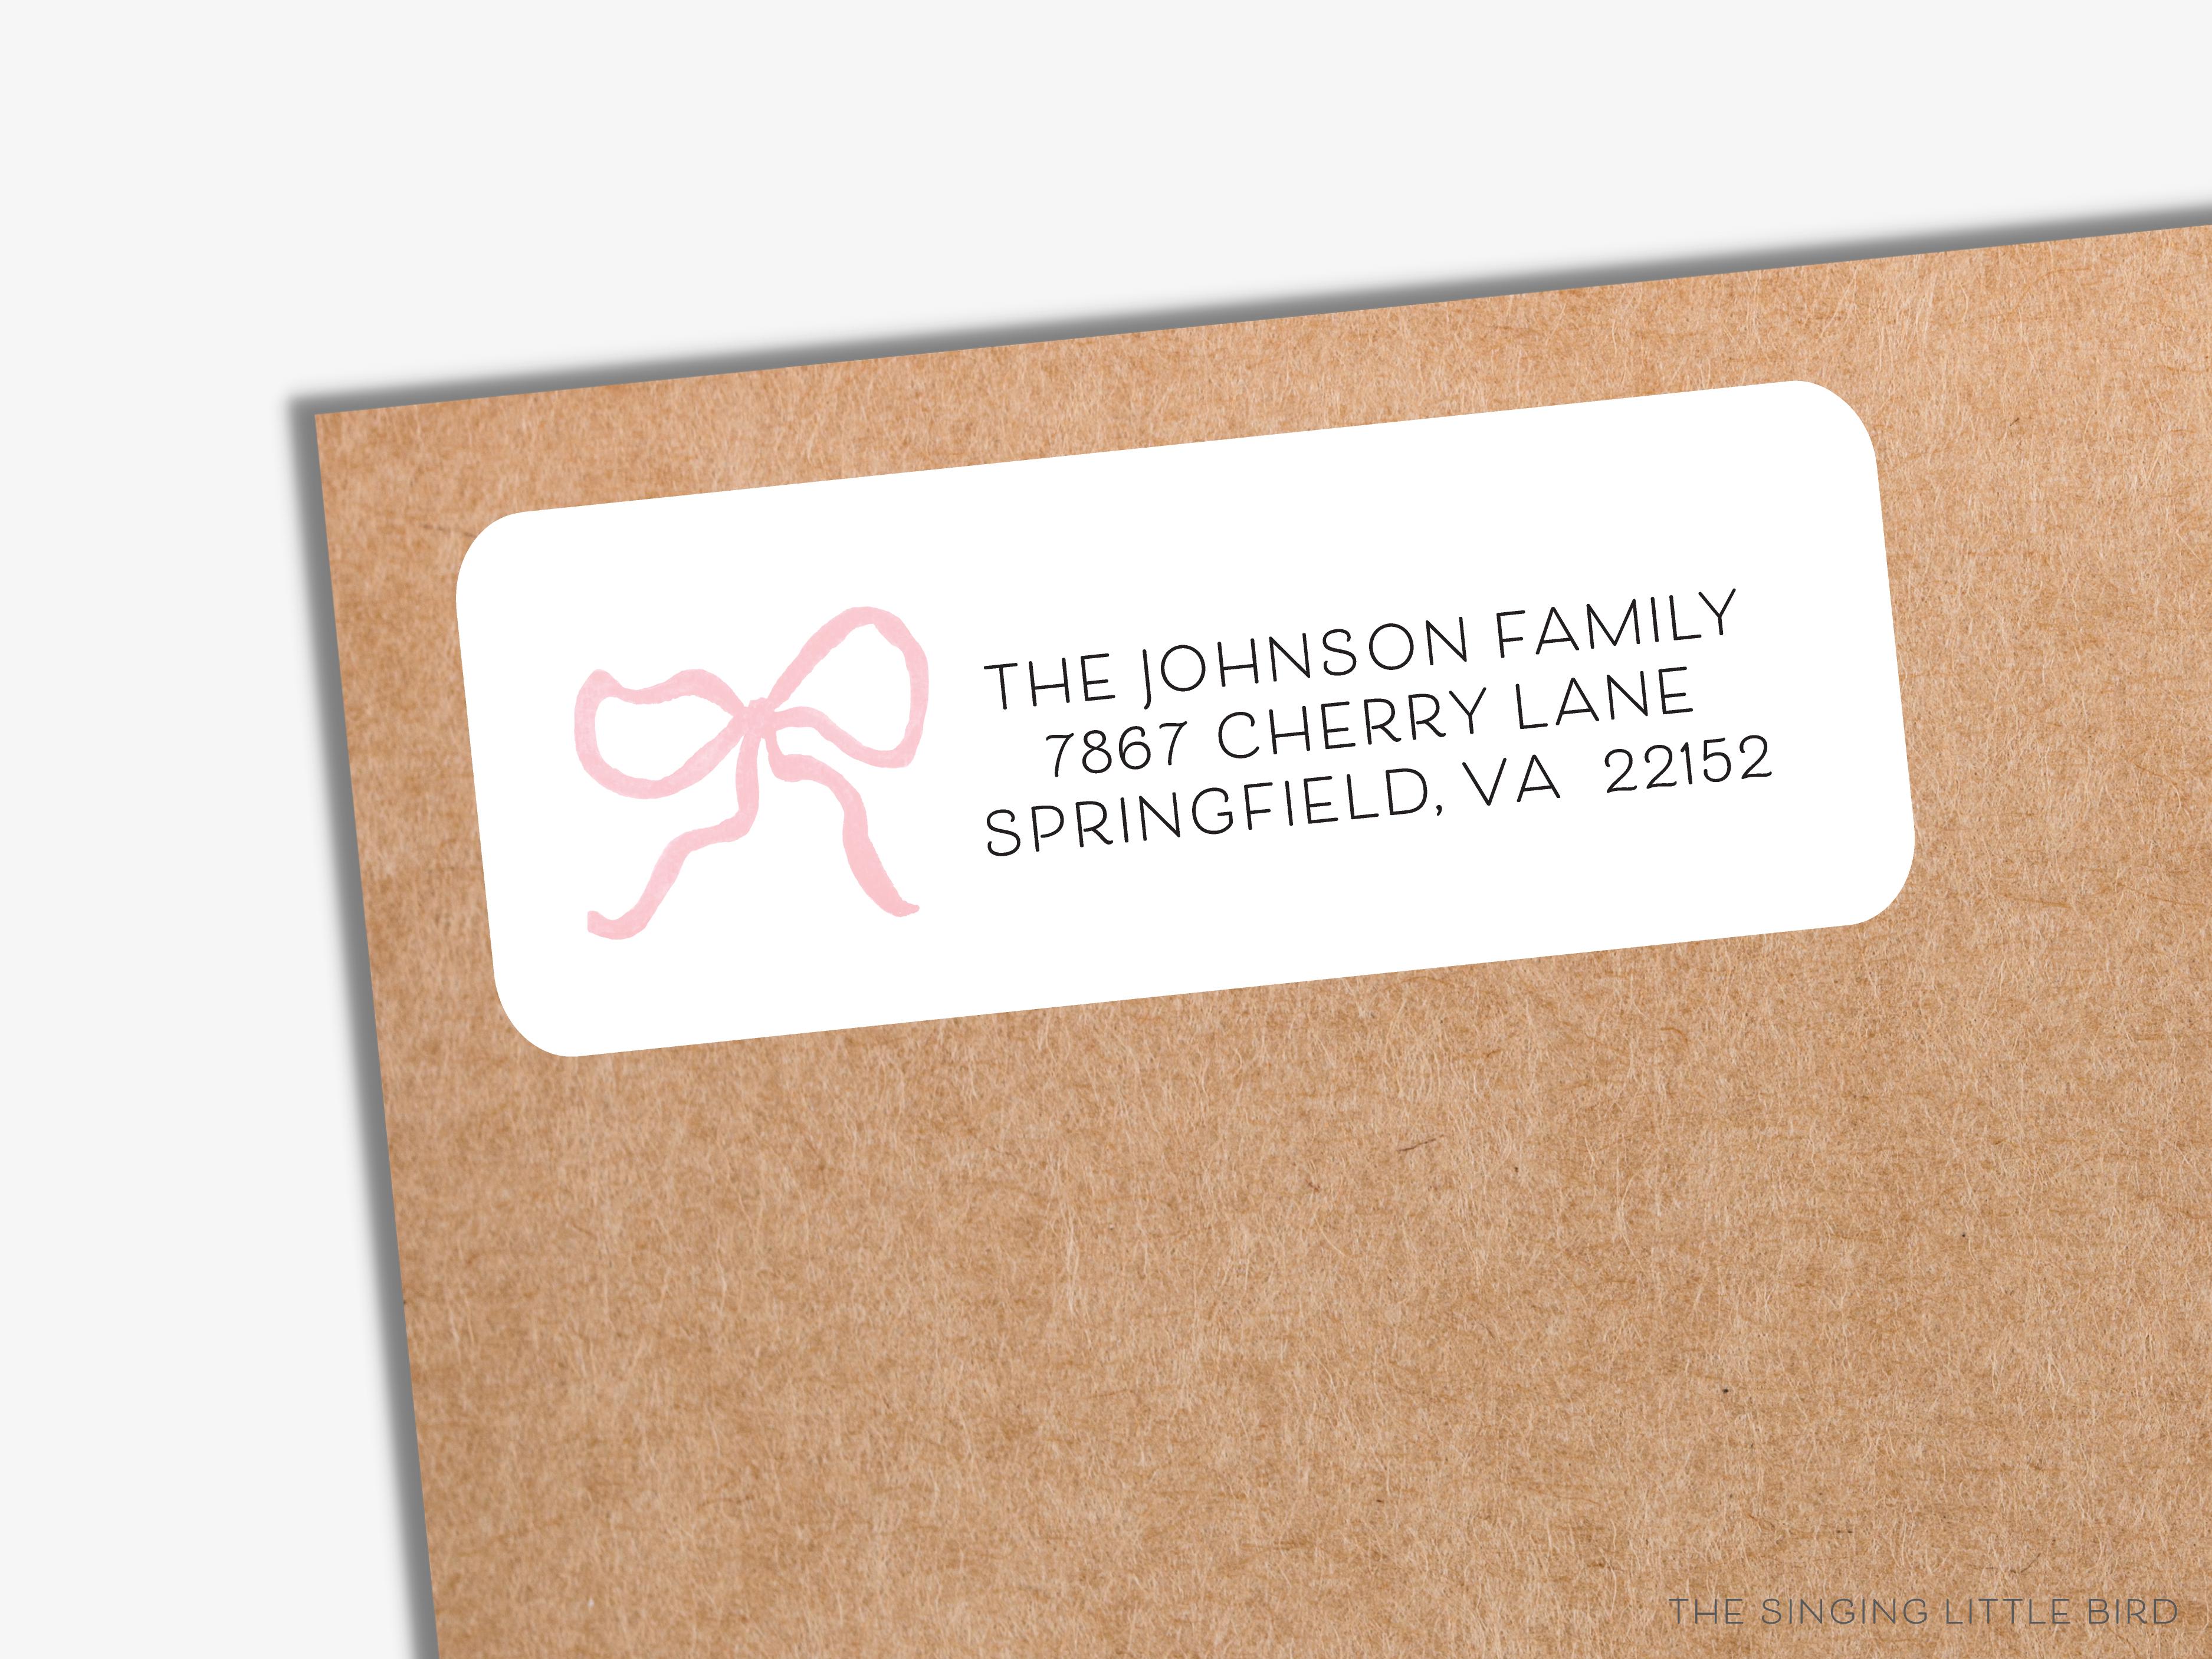 Pink Bow Return Address Labels-These personalized return address labels are 2.625" x 1" and feature our hand-painted watercolor bow, printed in the USA on beautiful matte finish labels. These make great gifts for yourself or the girly lover.-The Singing Little Bird